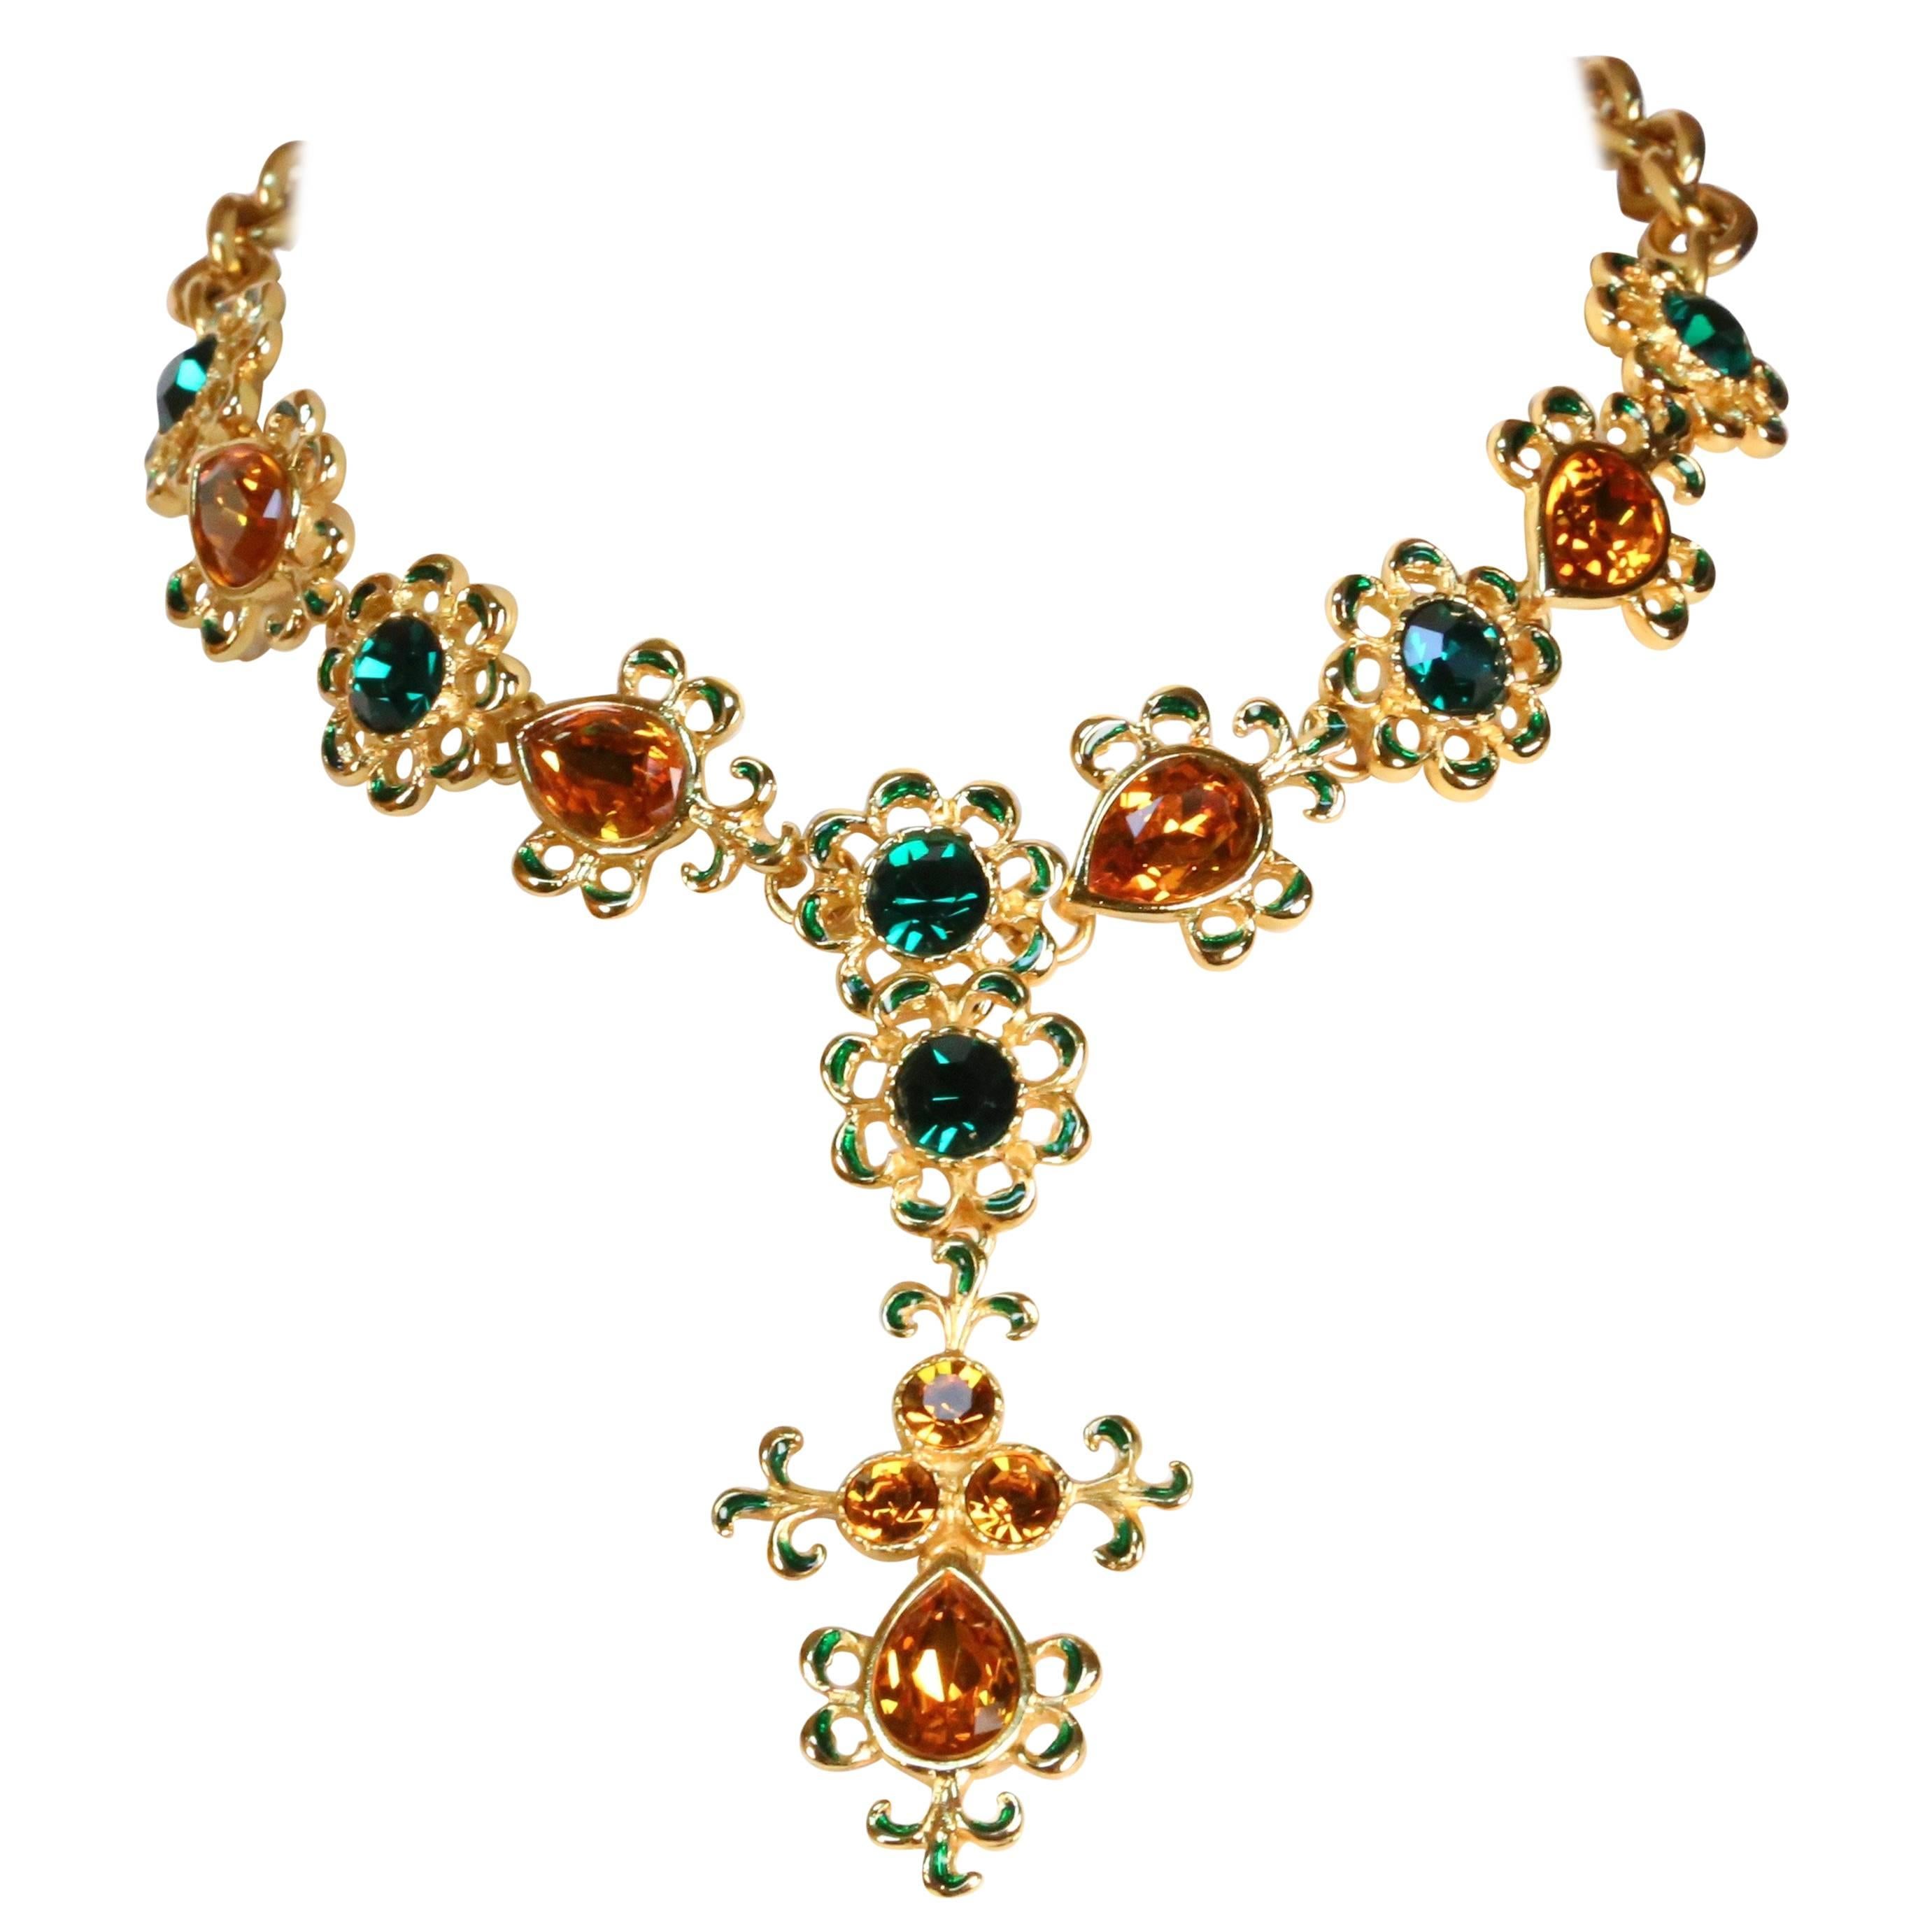  Yves Saint Laurent faceted glass and enameled gilt necklace with drop, 1990s